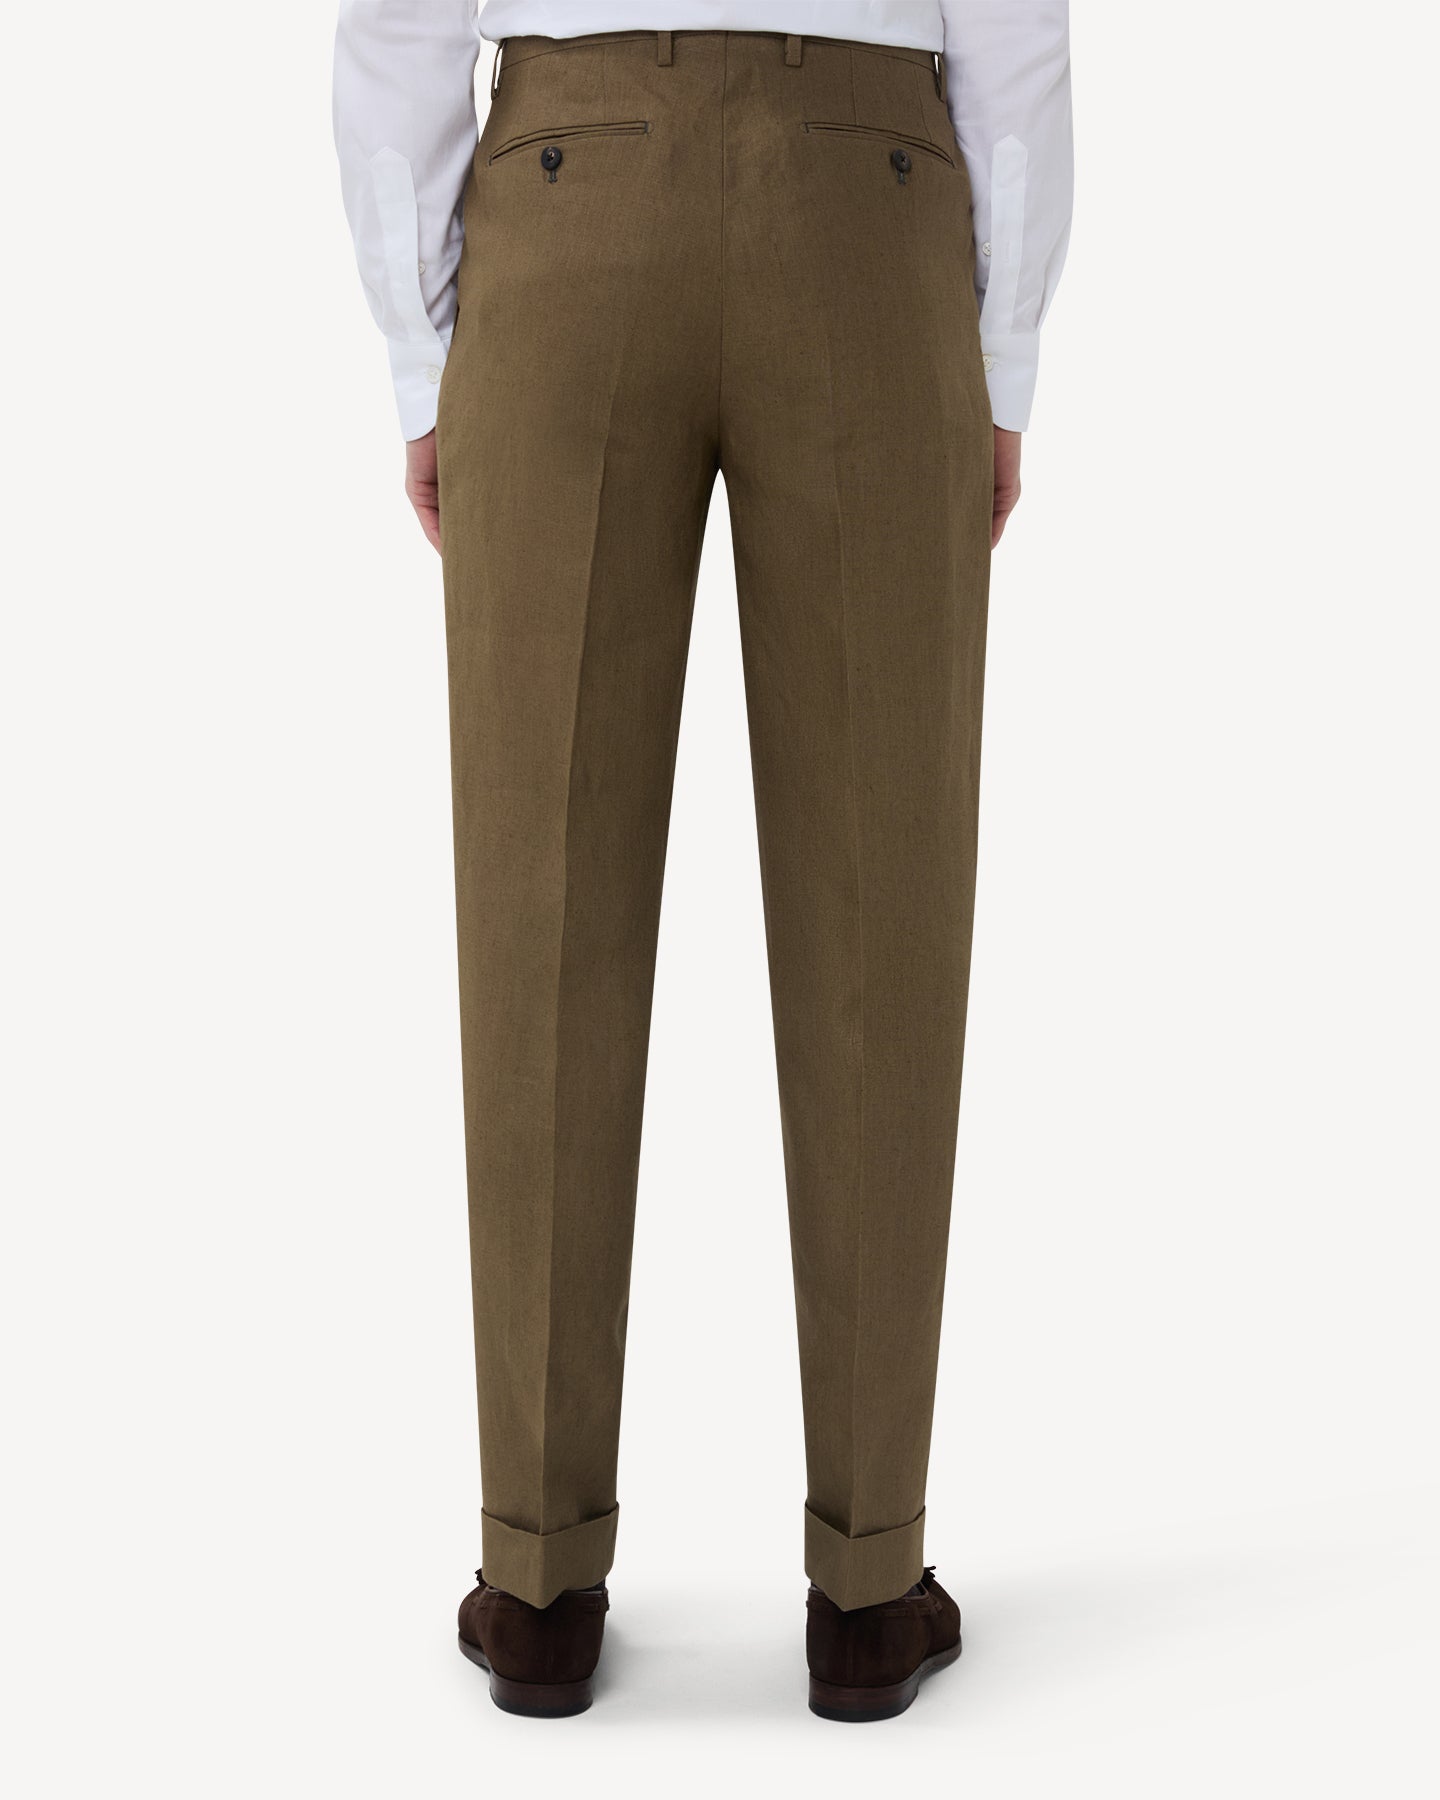 The back of olive brown linen trousers with double pleats and belt loops